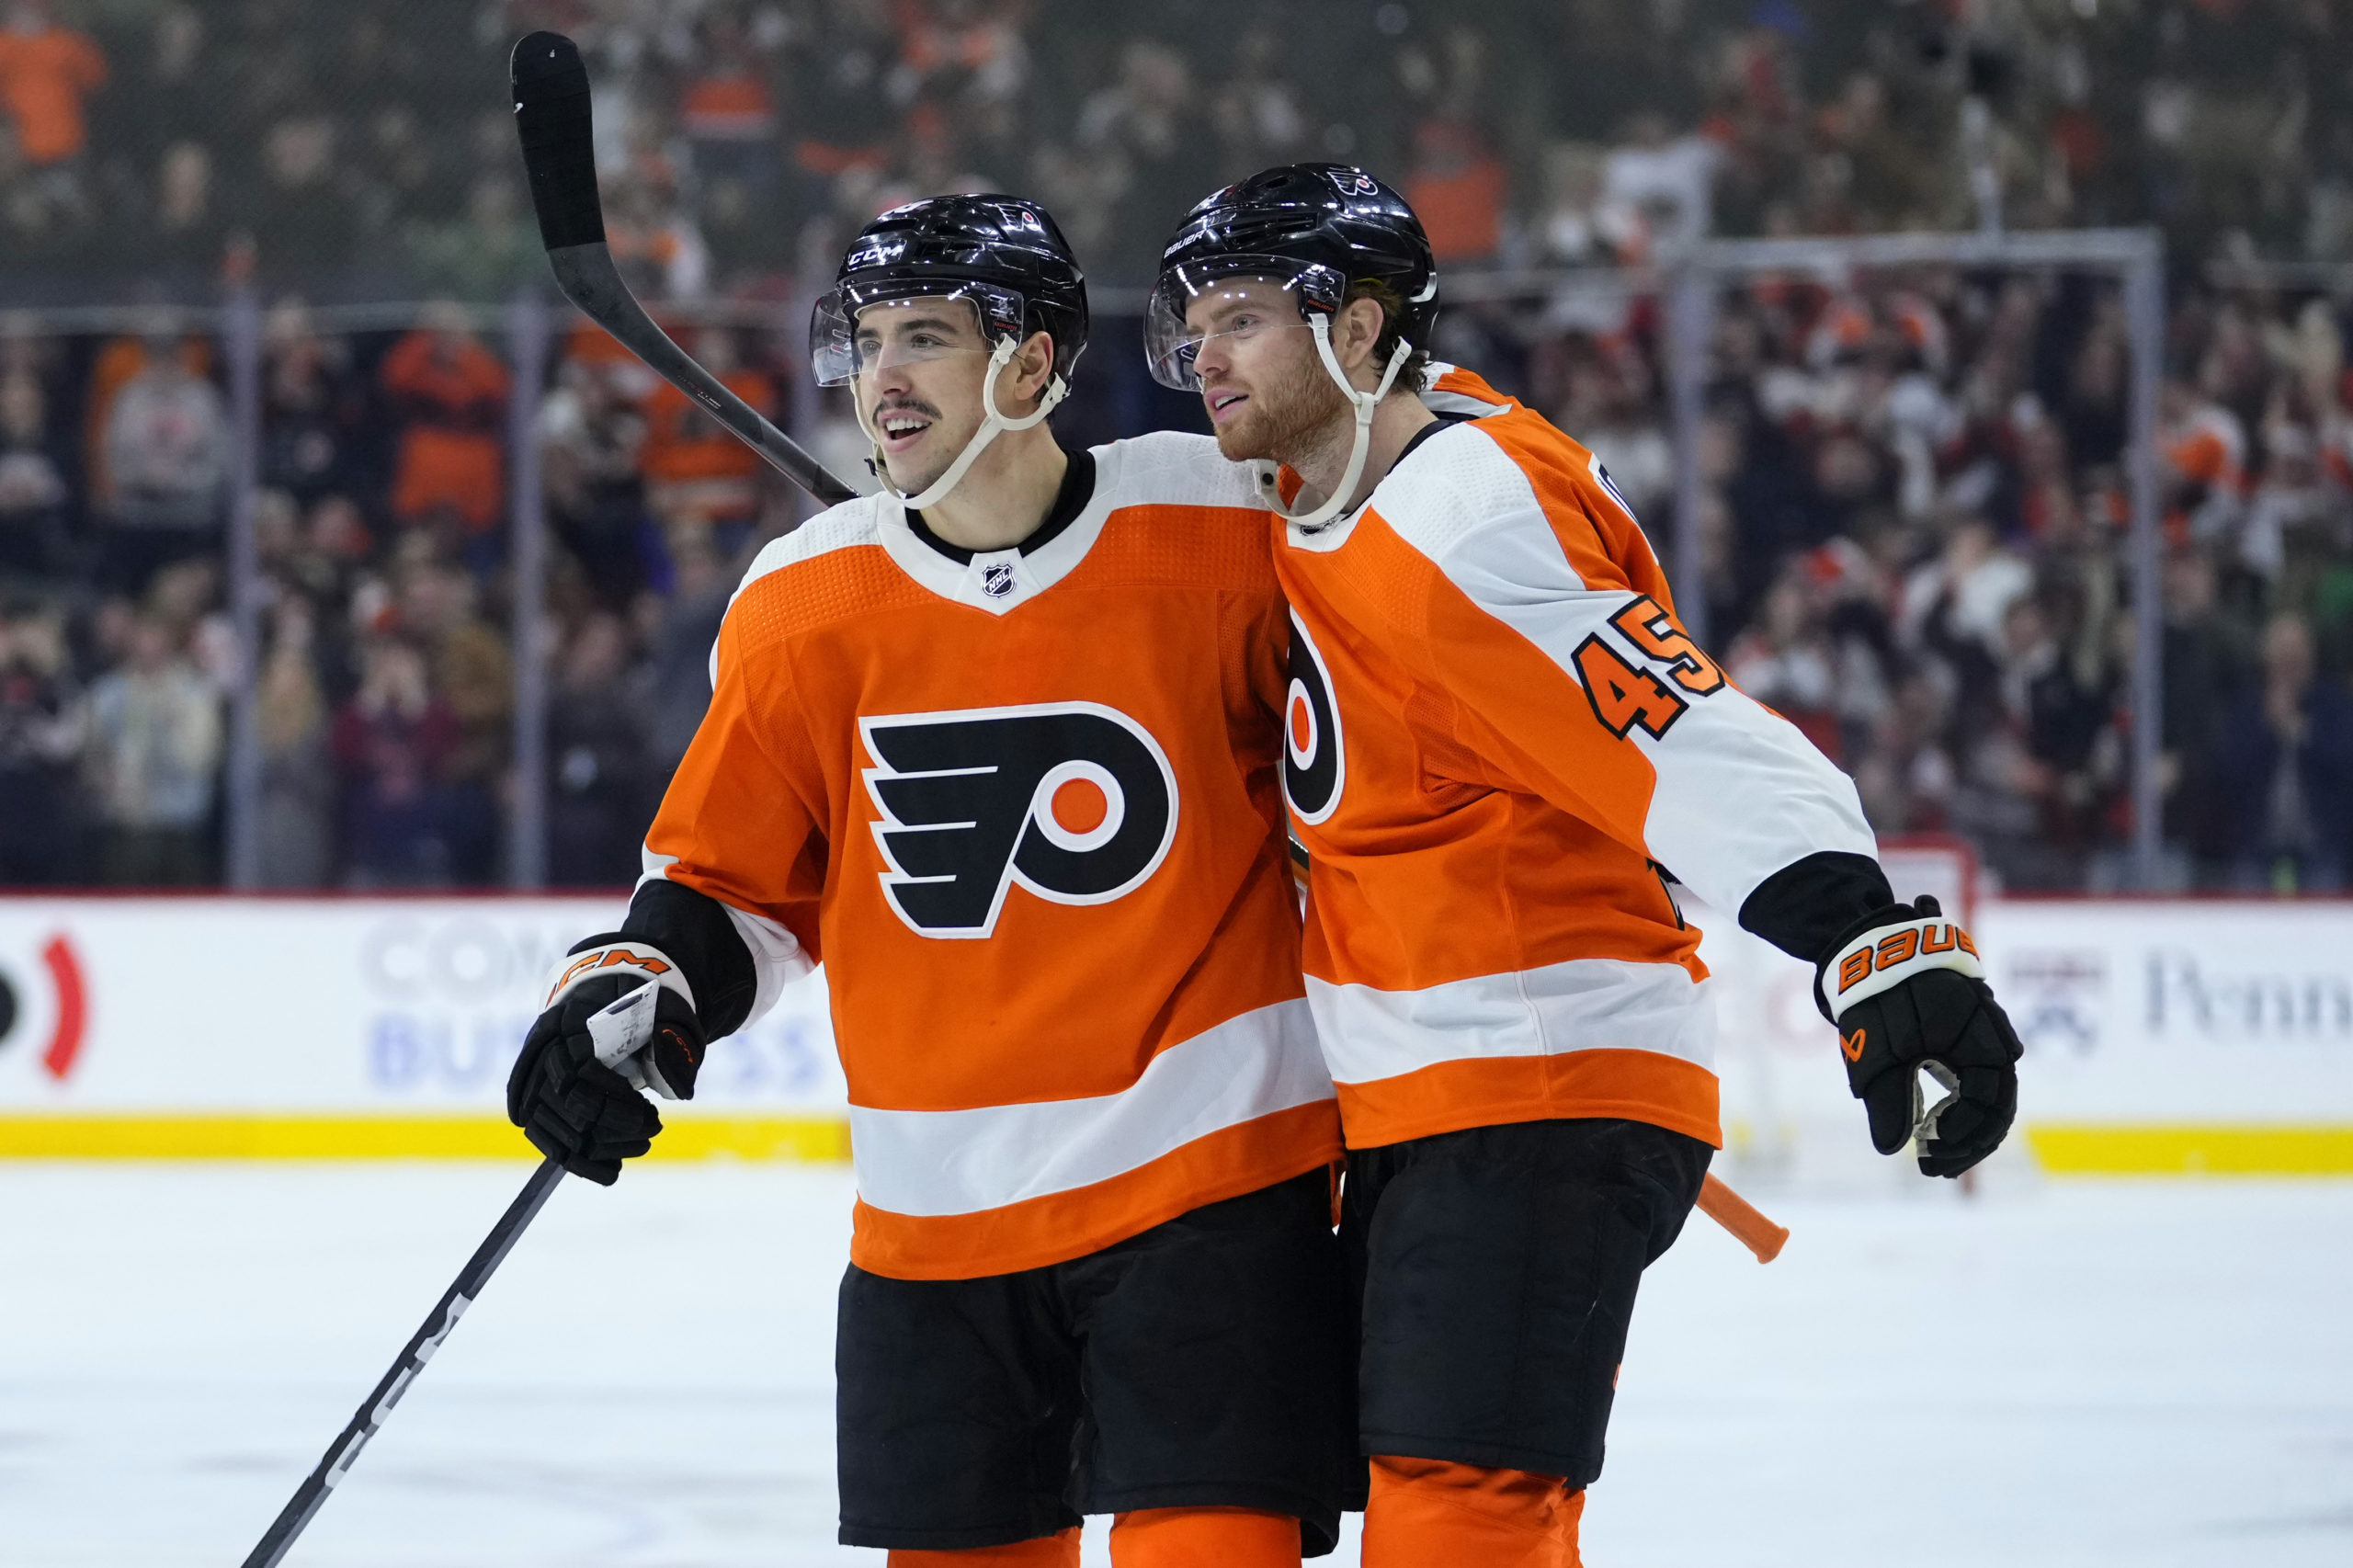 Philadelphia Flyers: This season is crucial for the legacy of